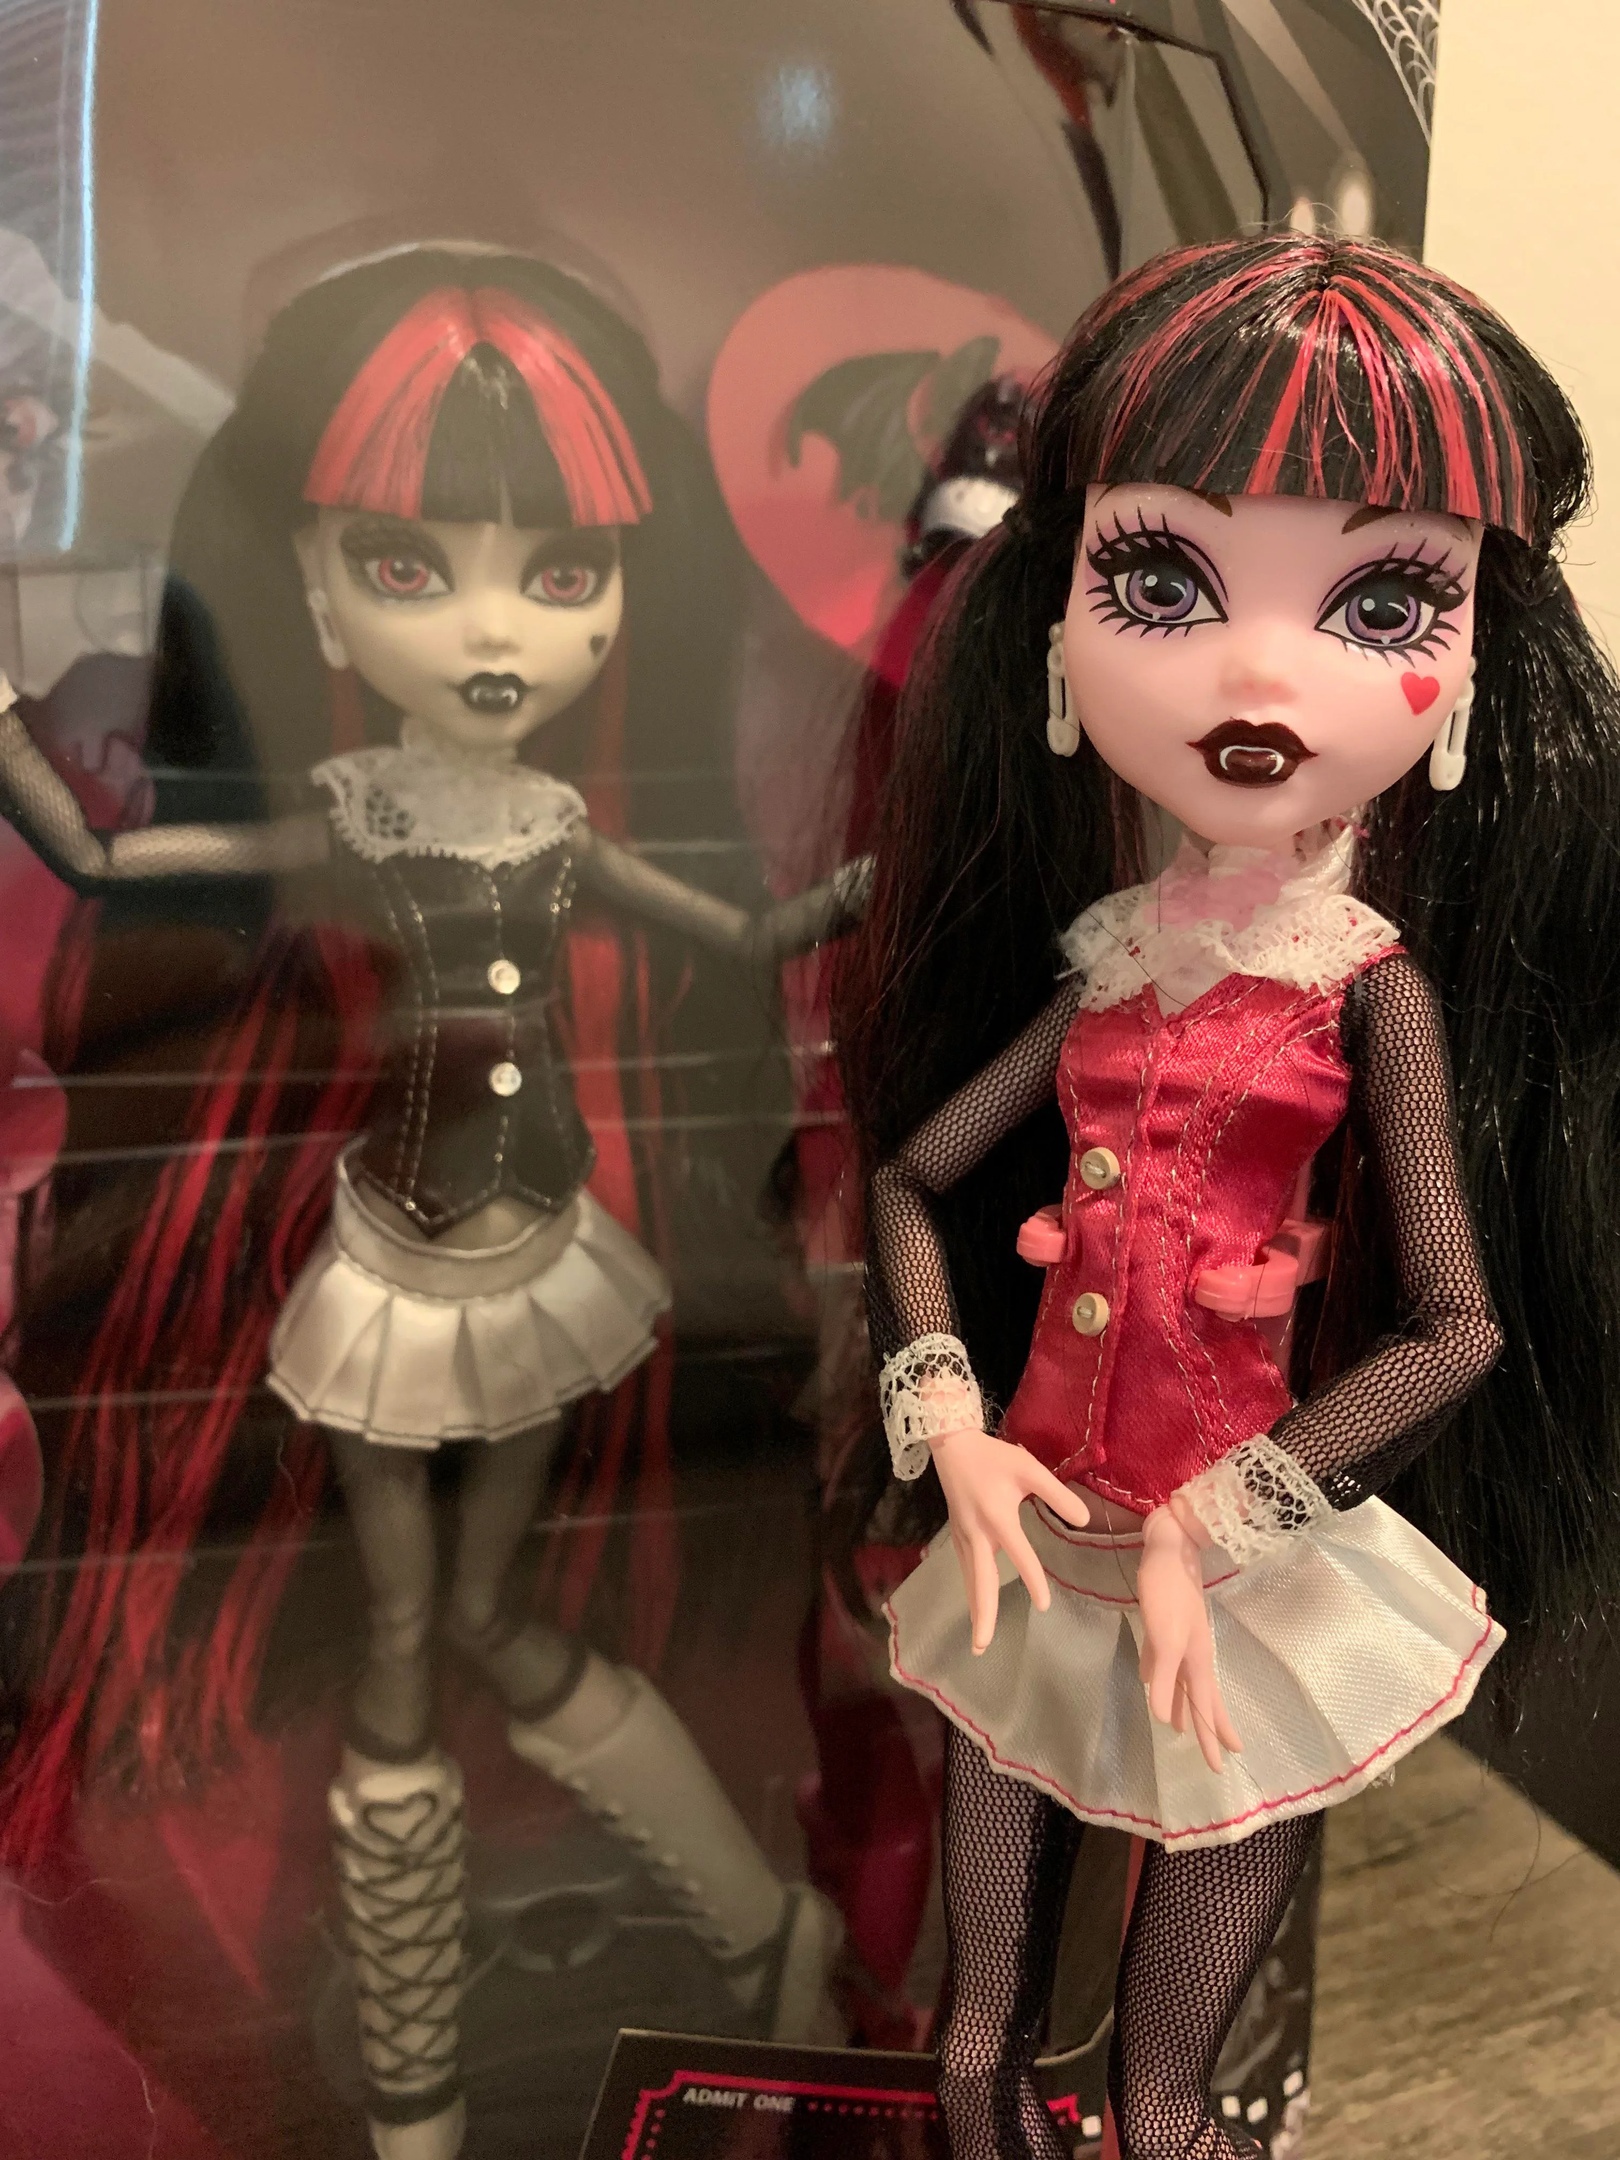 Added OOB 1st Wave & Reel Drama Draculaura to my collection today